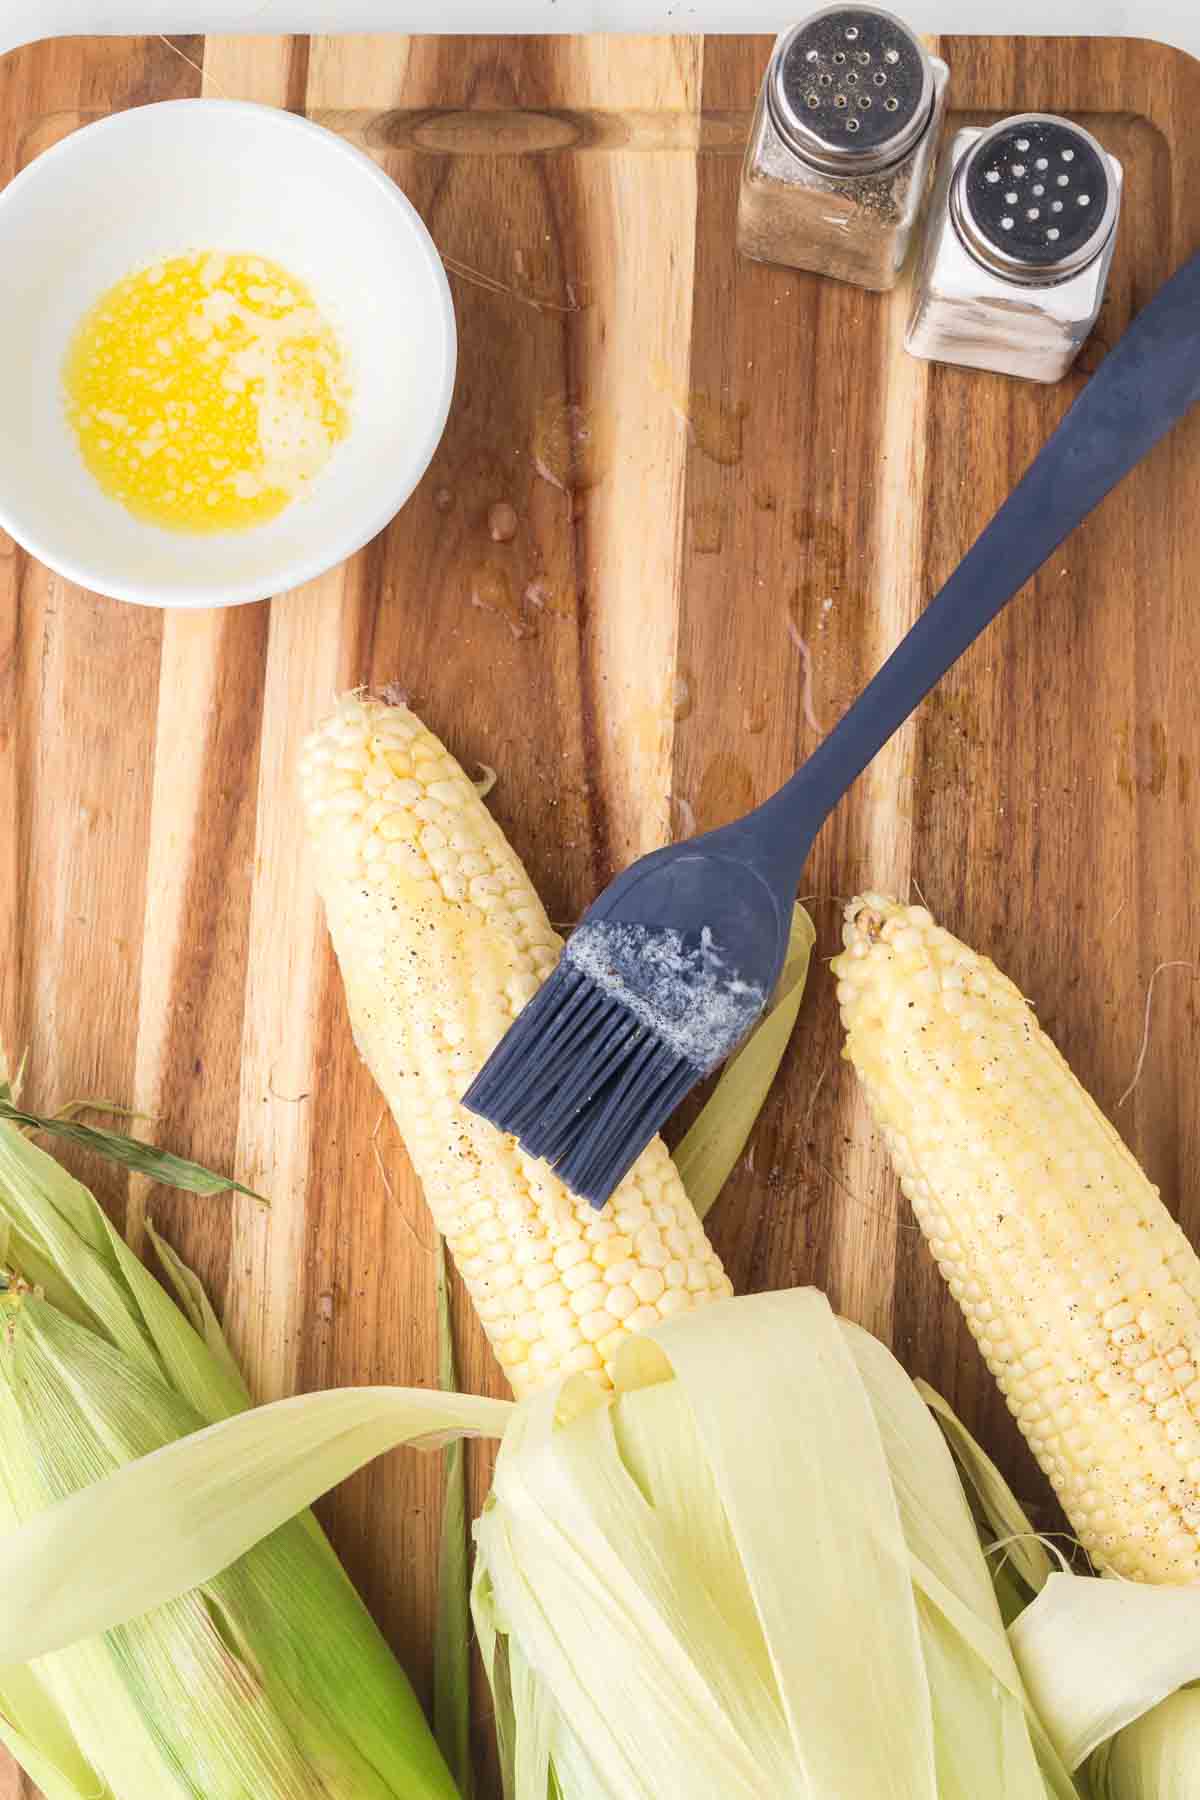 three pieces of corn on the cob with the husk pulled down and the corn lathered in buttered laying on a wooden board